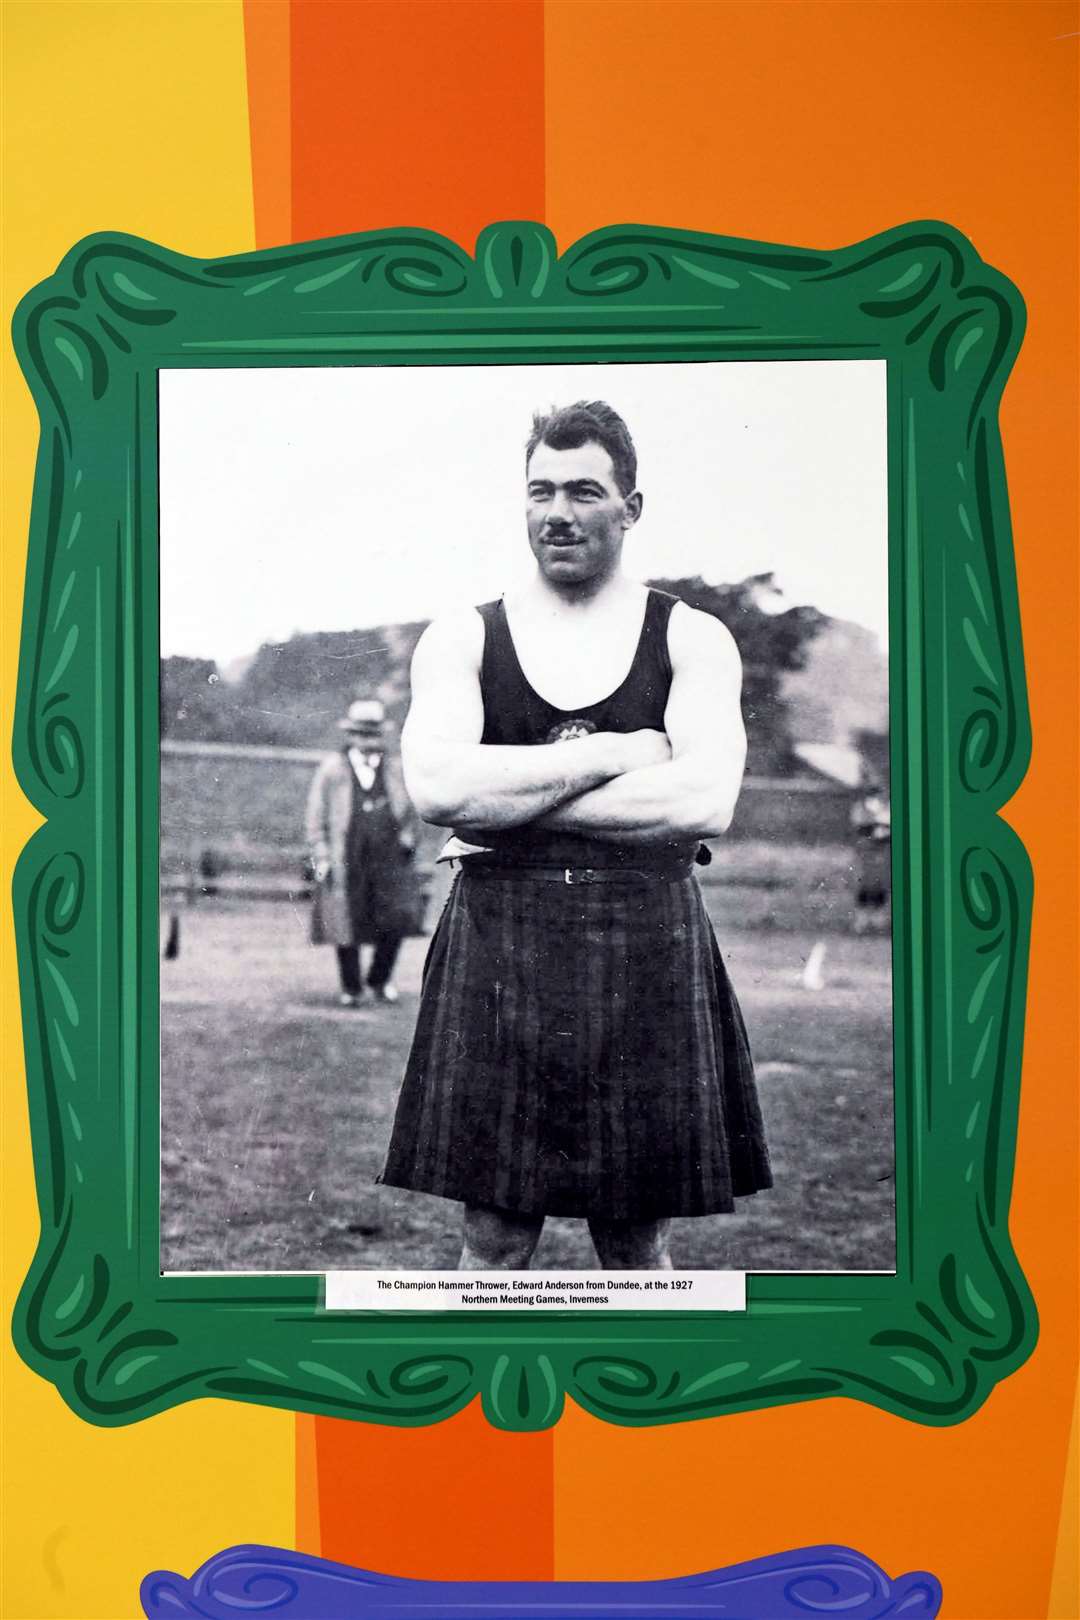 Champion hammer thrower, Edward Anderson of Dundee, at the 1927 Northern Meeting Games, Inverness.